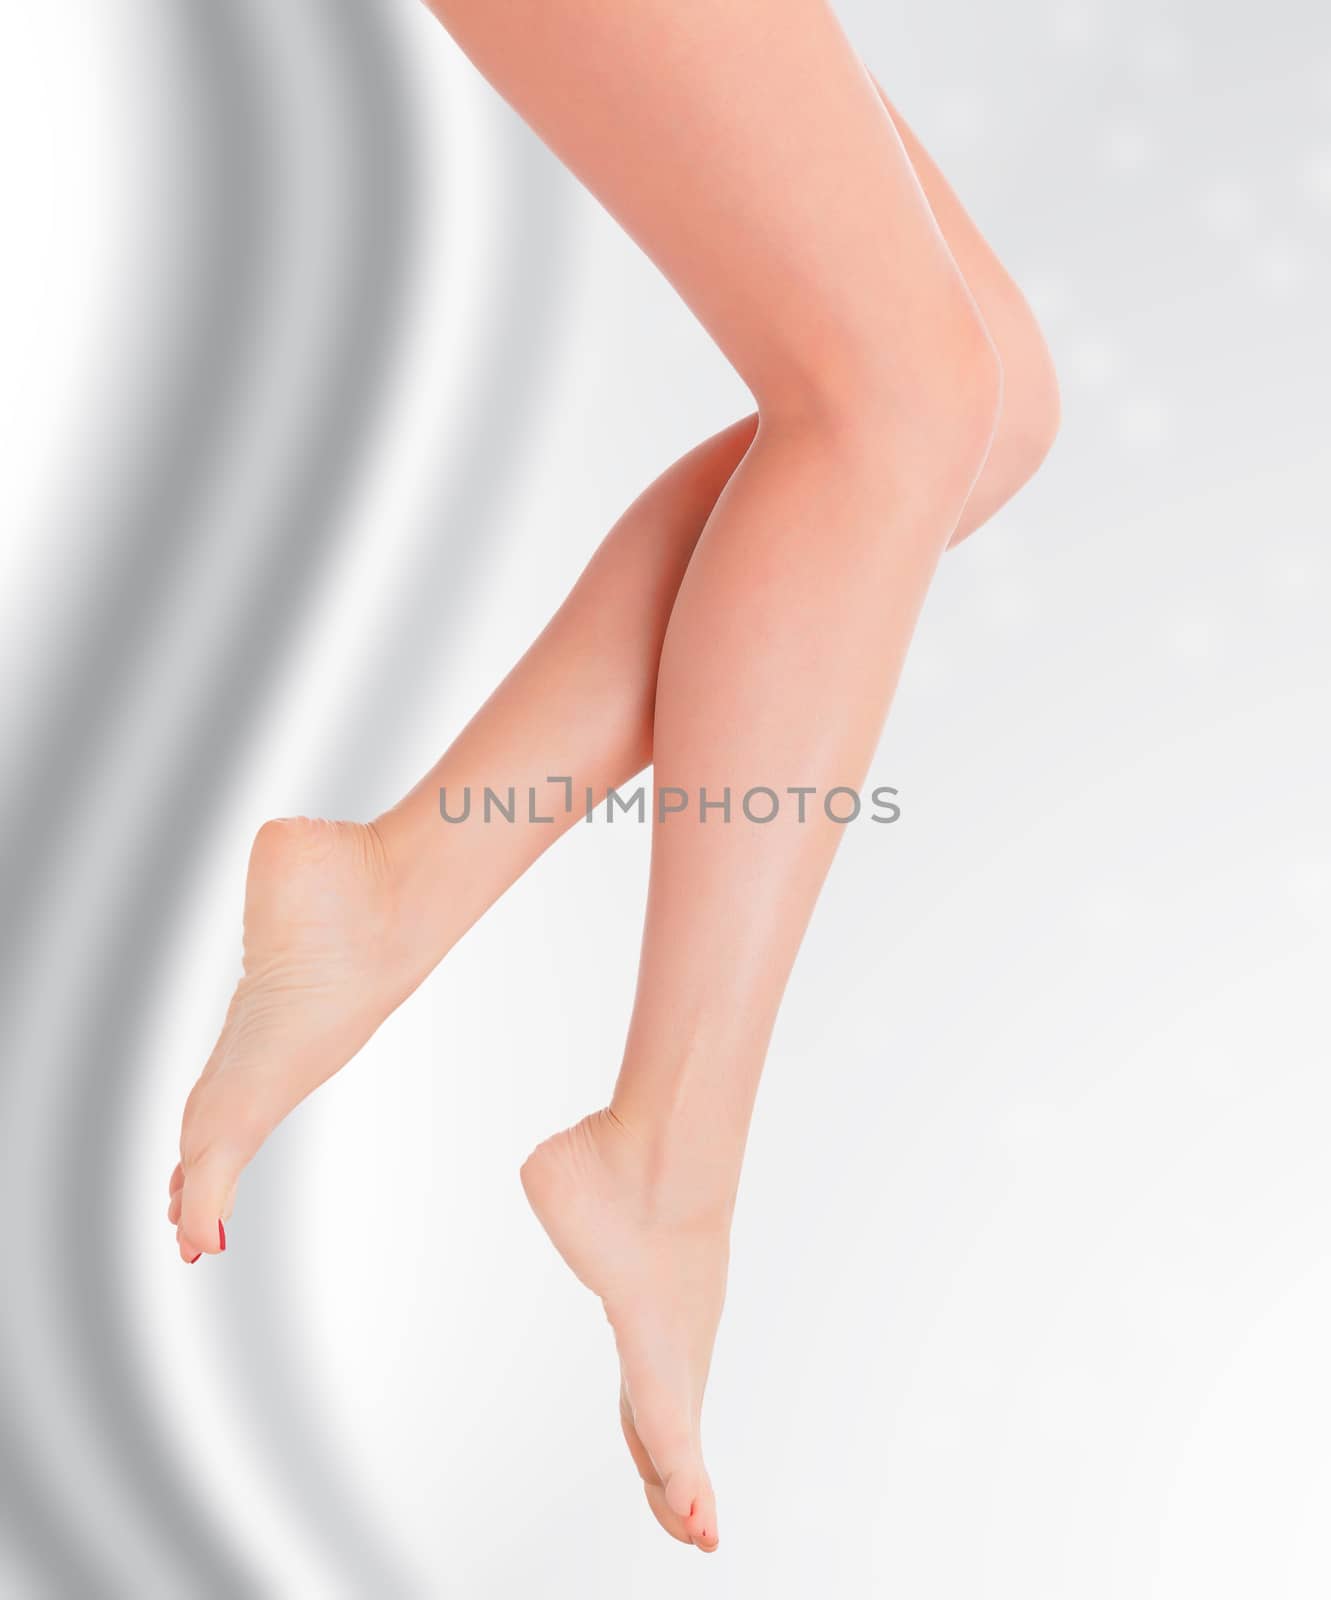 Female legson grey blurred background with a space for your text